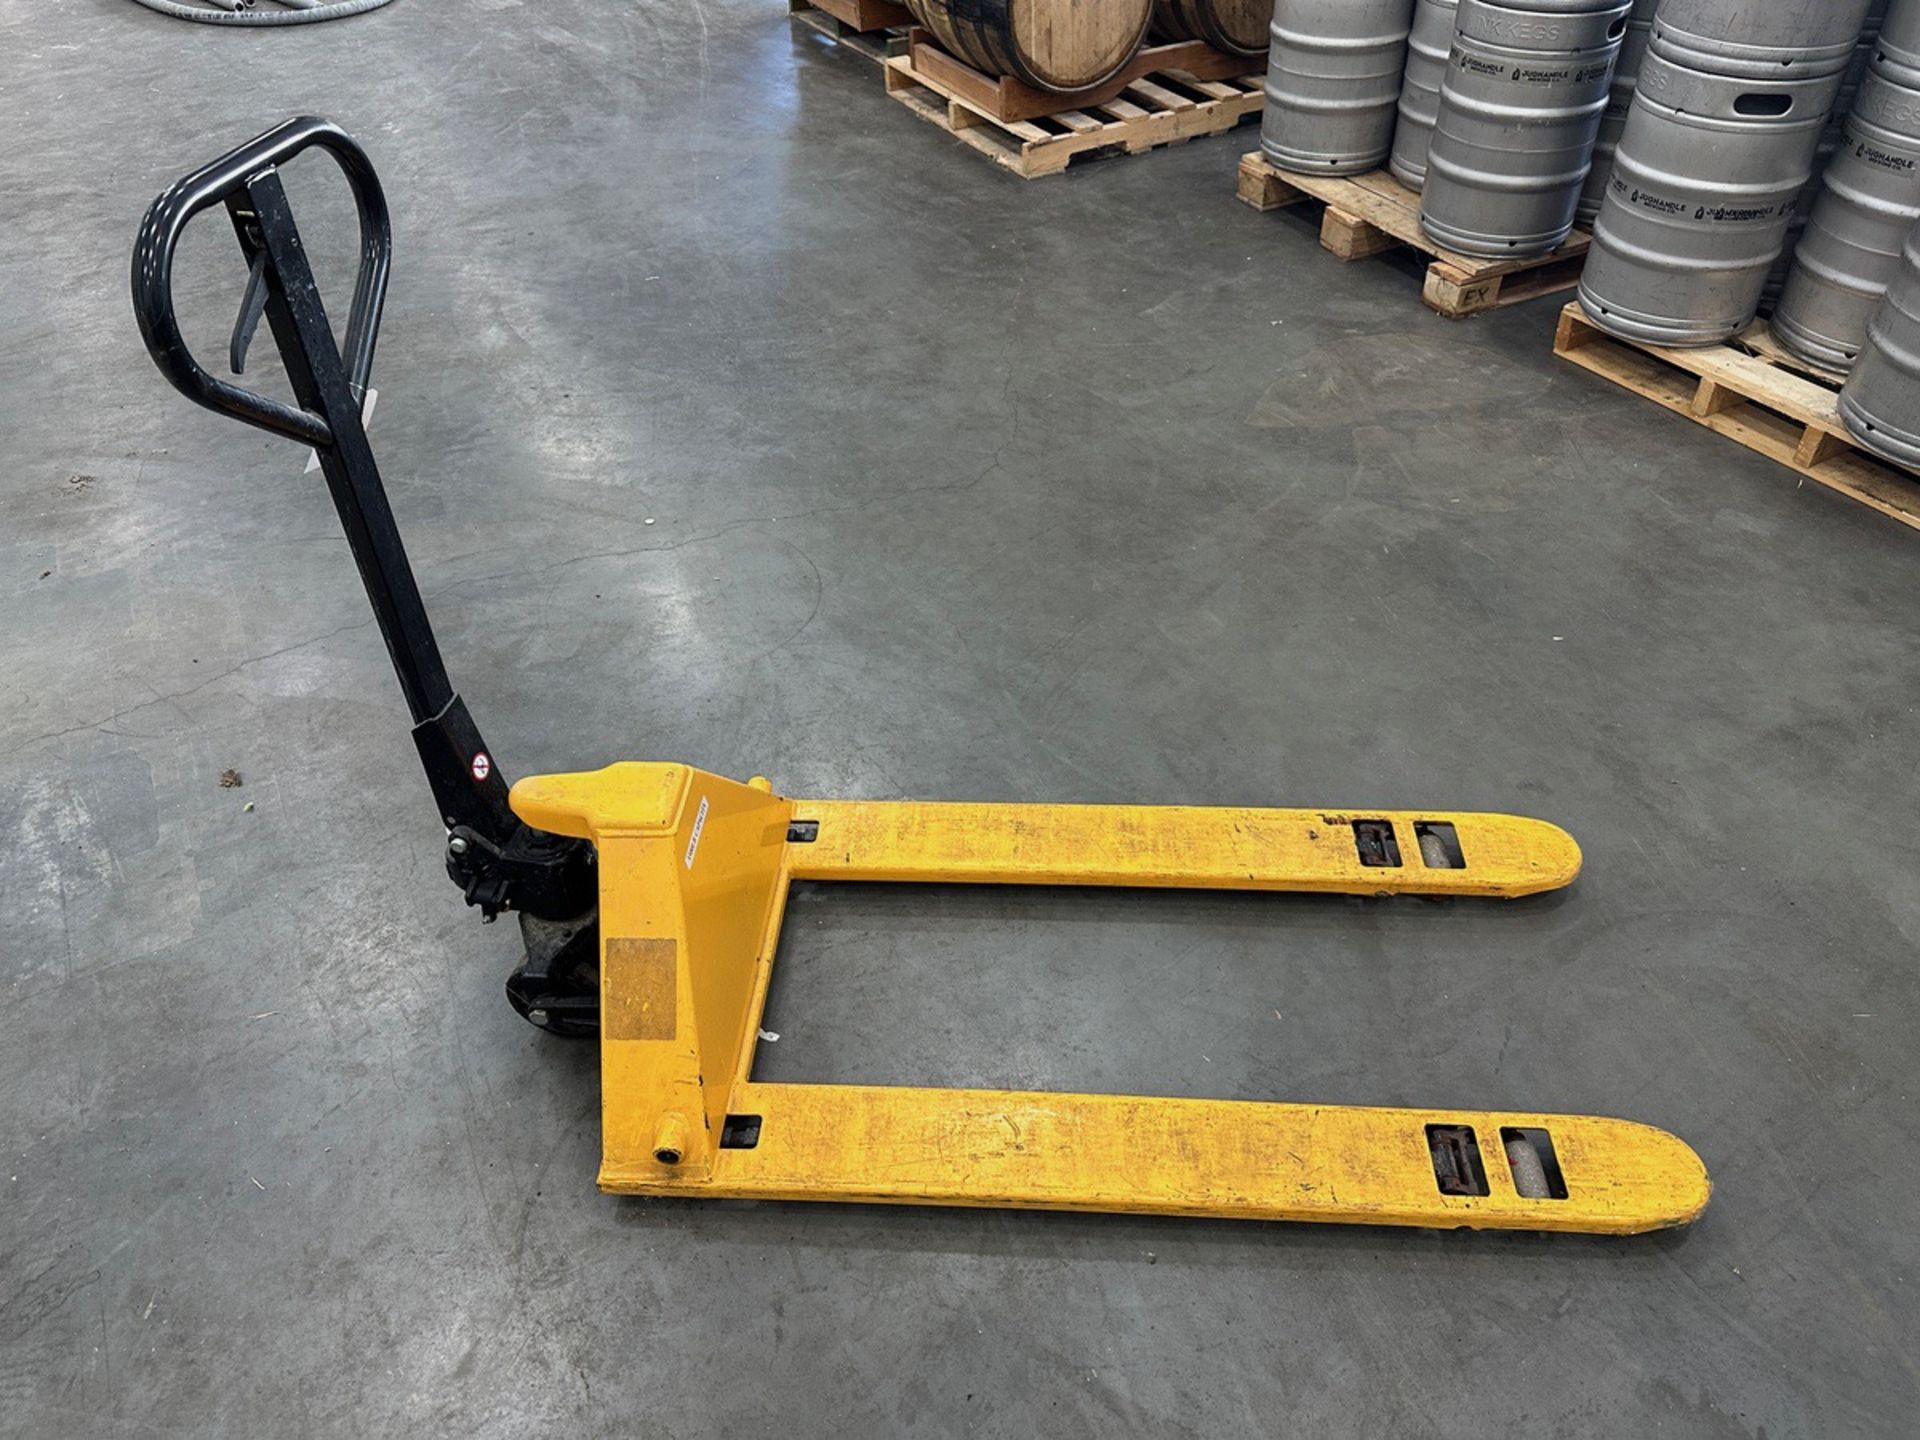 Uline Pallet Jack with 3300 LB Capacity | Rig Fee $25